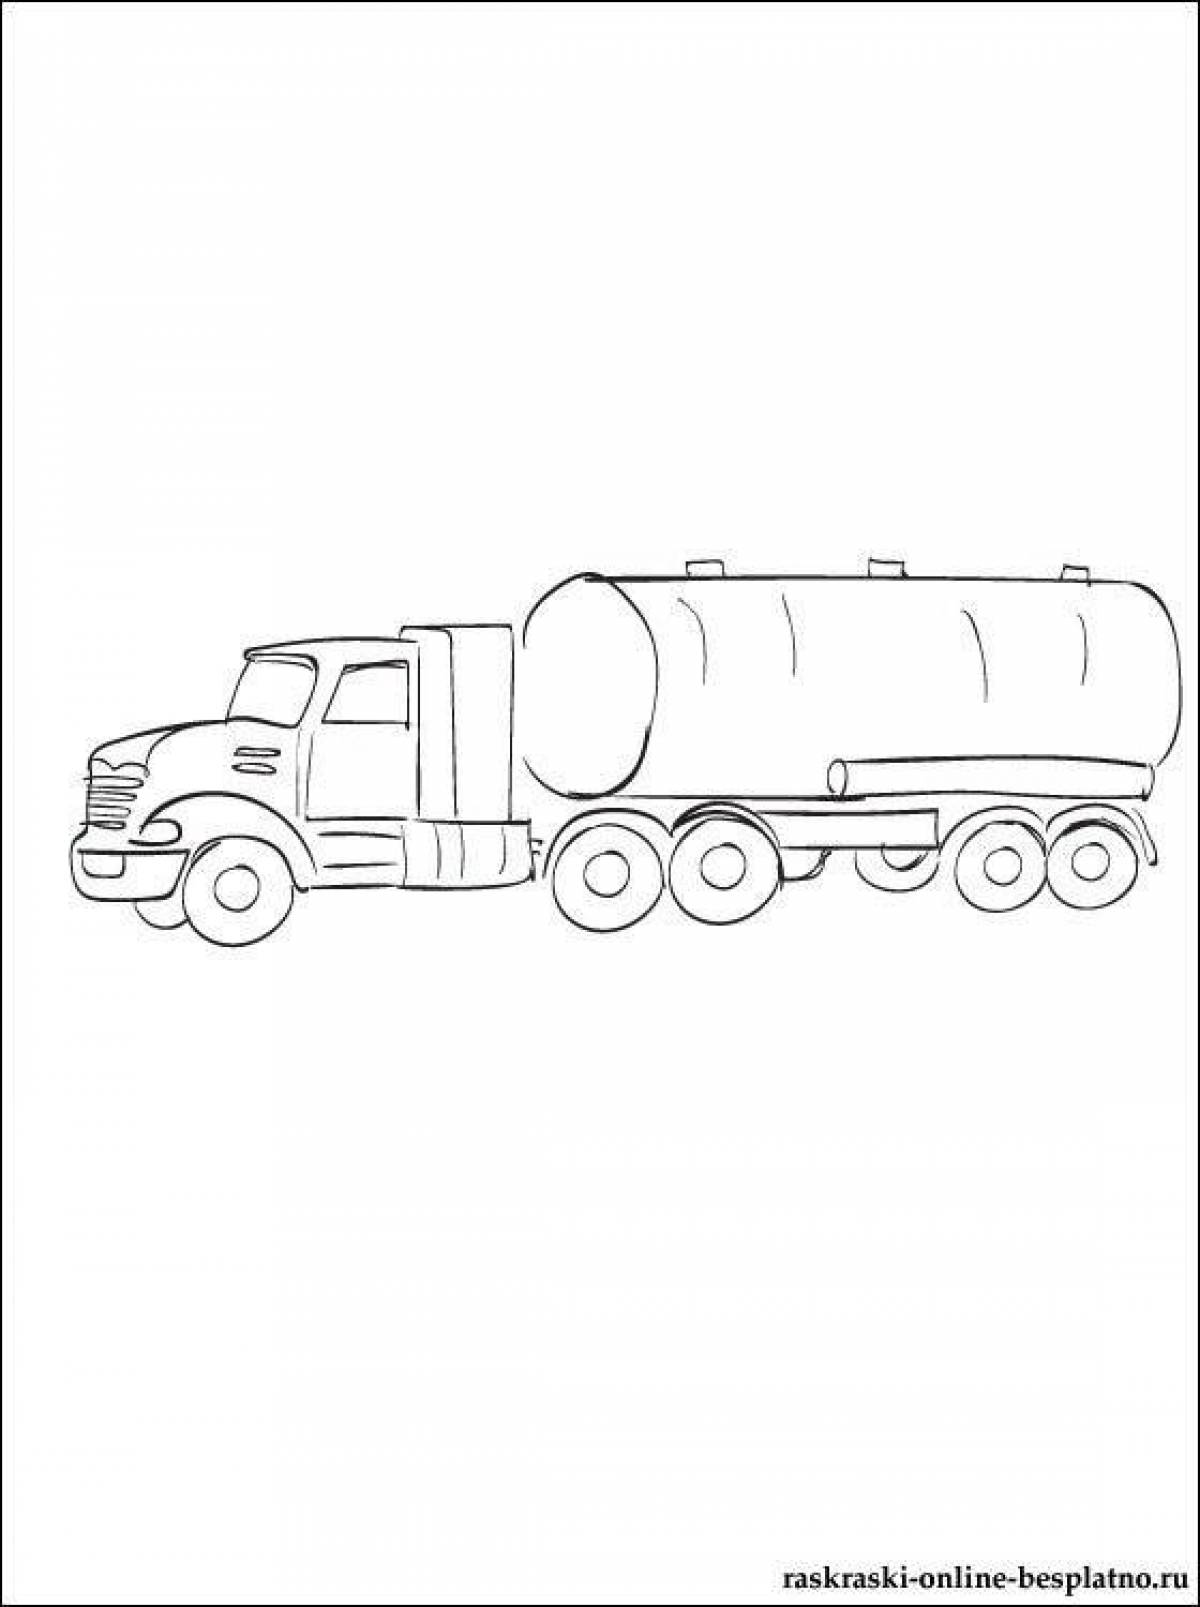 Fun coloring of a fuel truck